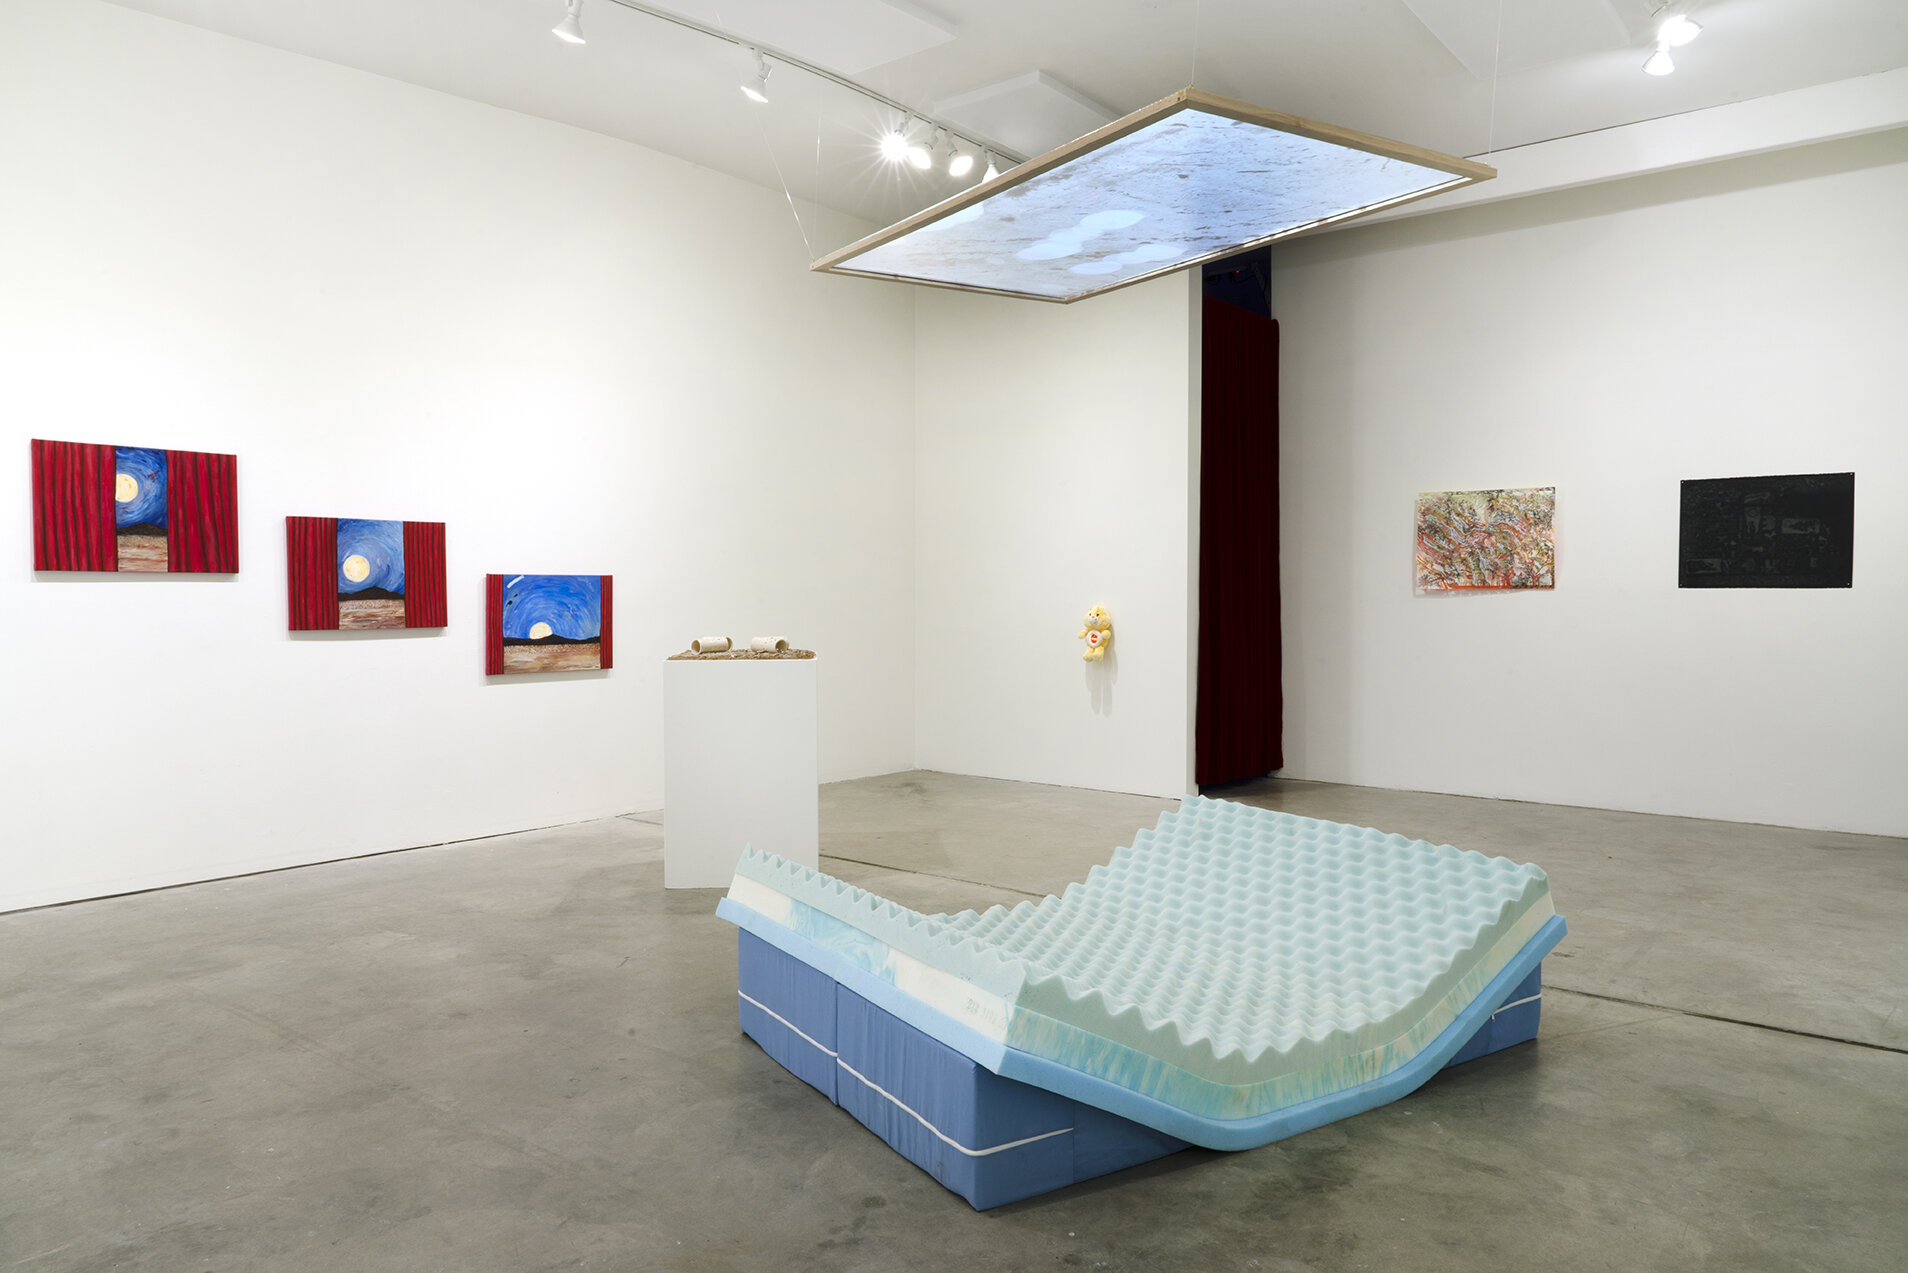  Installation view at Carnation Contemporary in Portland, OR 2021  photo credit: John Whitten 